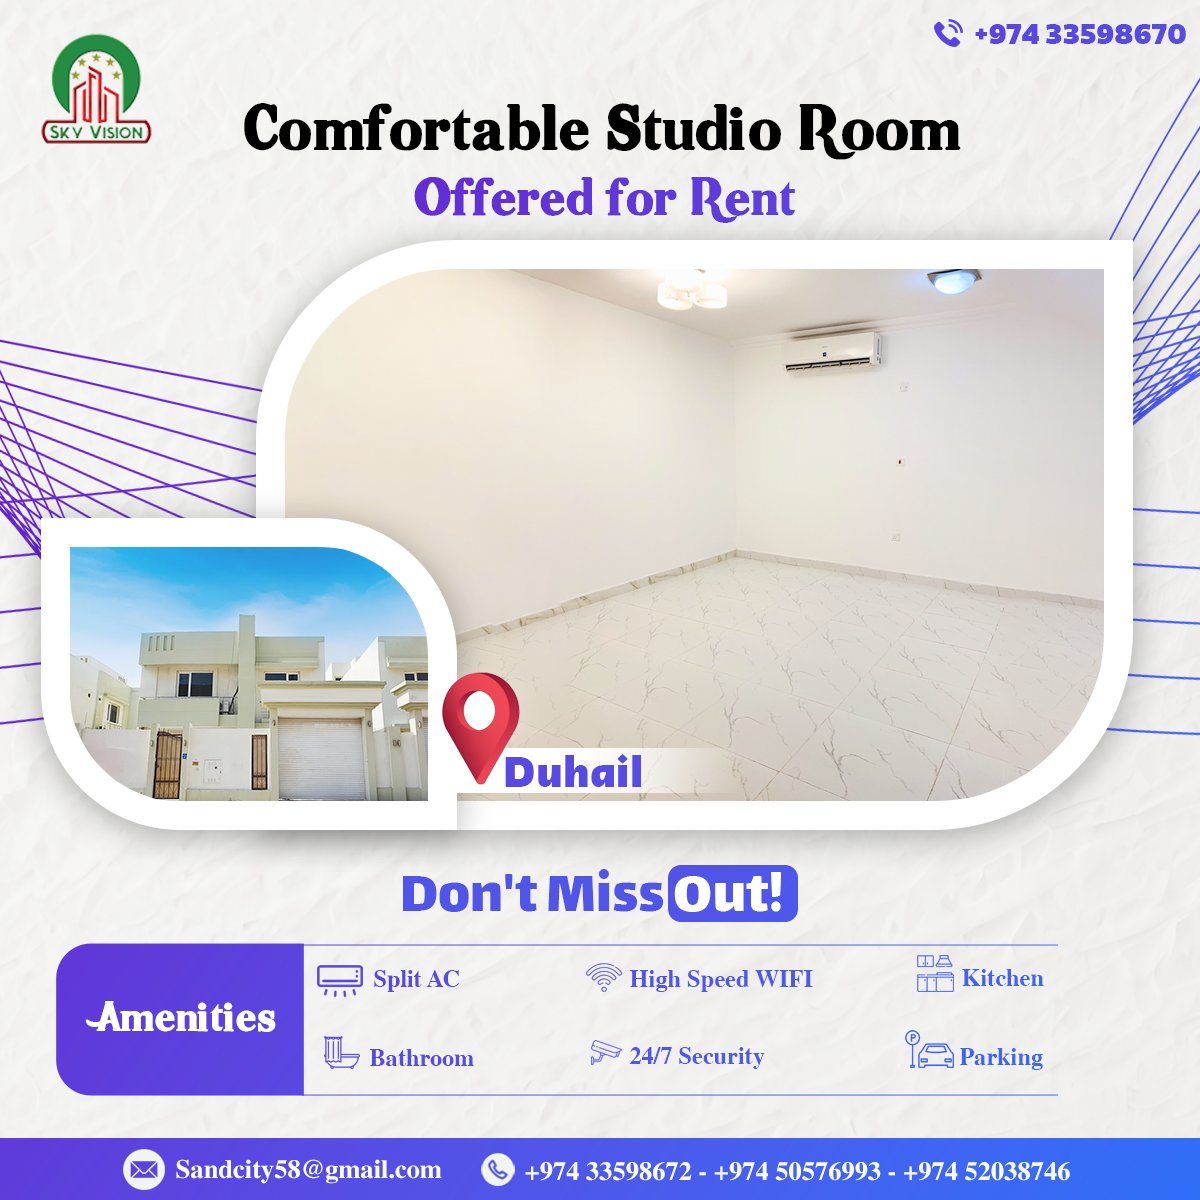 Spacious studio room available for rent at an affordable rate! 🏠💸 #StudioForRent #AffordableLiving #QatarRealEstate #PropertyInQatar #QatarHousing #QatarPropertyMarket 

Location : Al Duhail Behind Tawar Mall, Doha

Property Links : shorturl.at/pxCTY